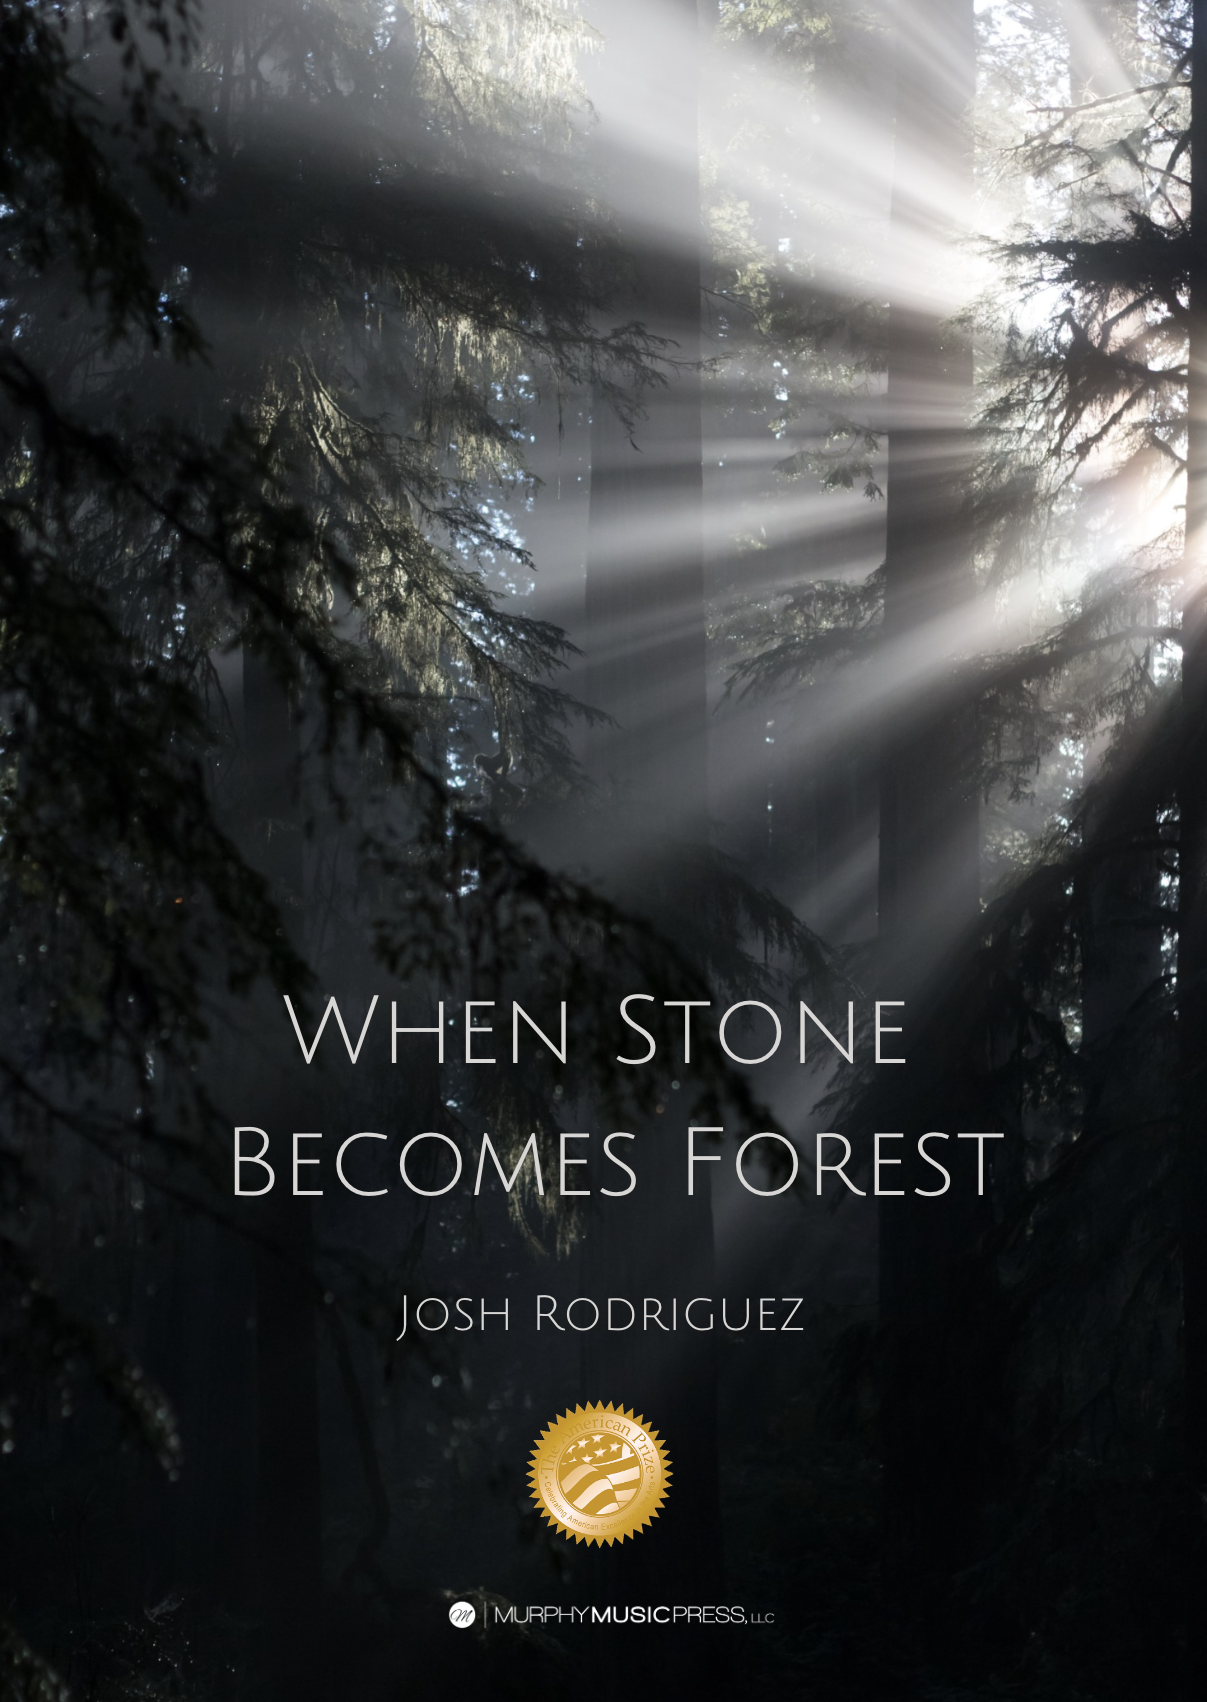 When Stone Becomes Forest by Josh Rodriguez